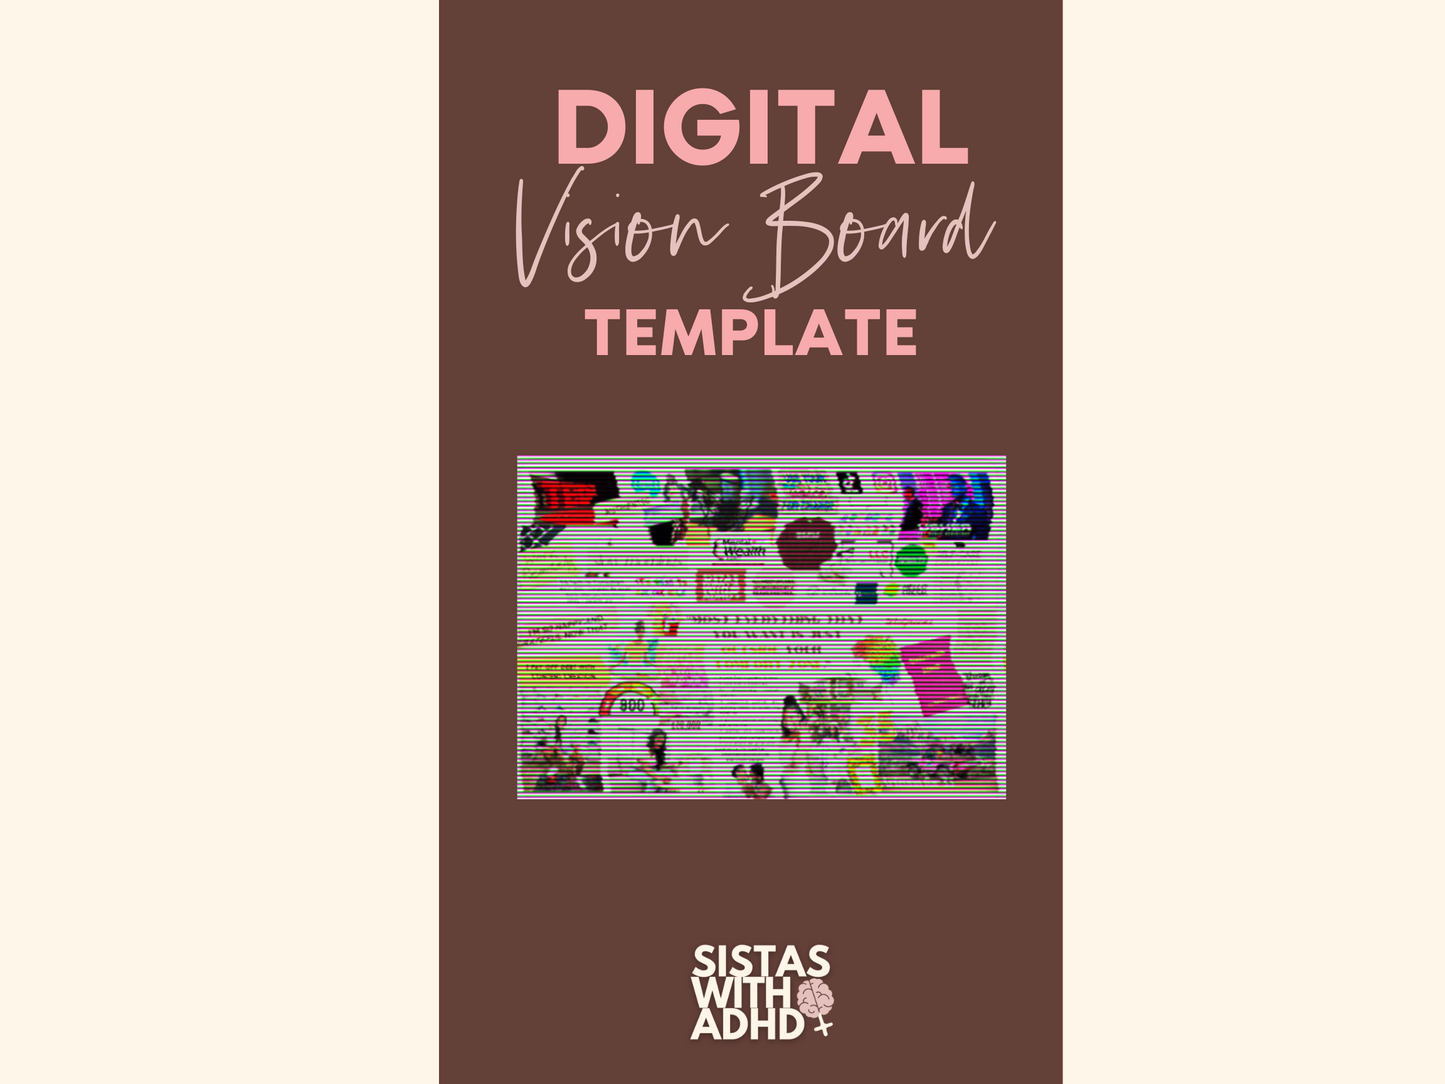 The Sista's with ADHD Digital Vision Board Template